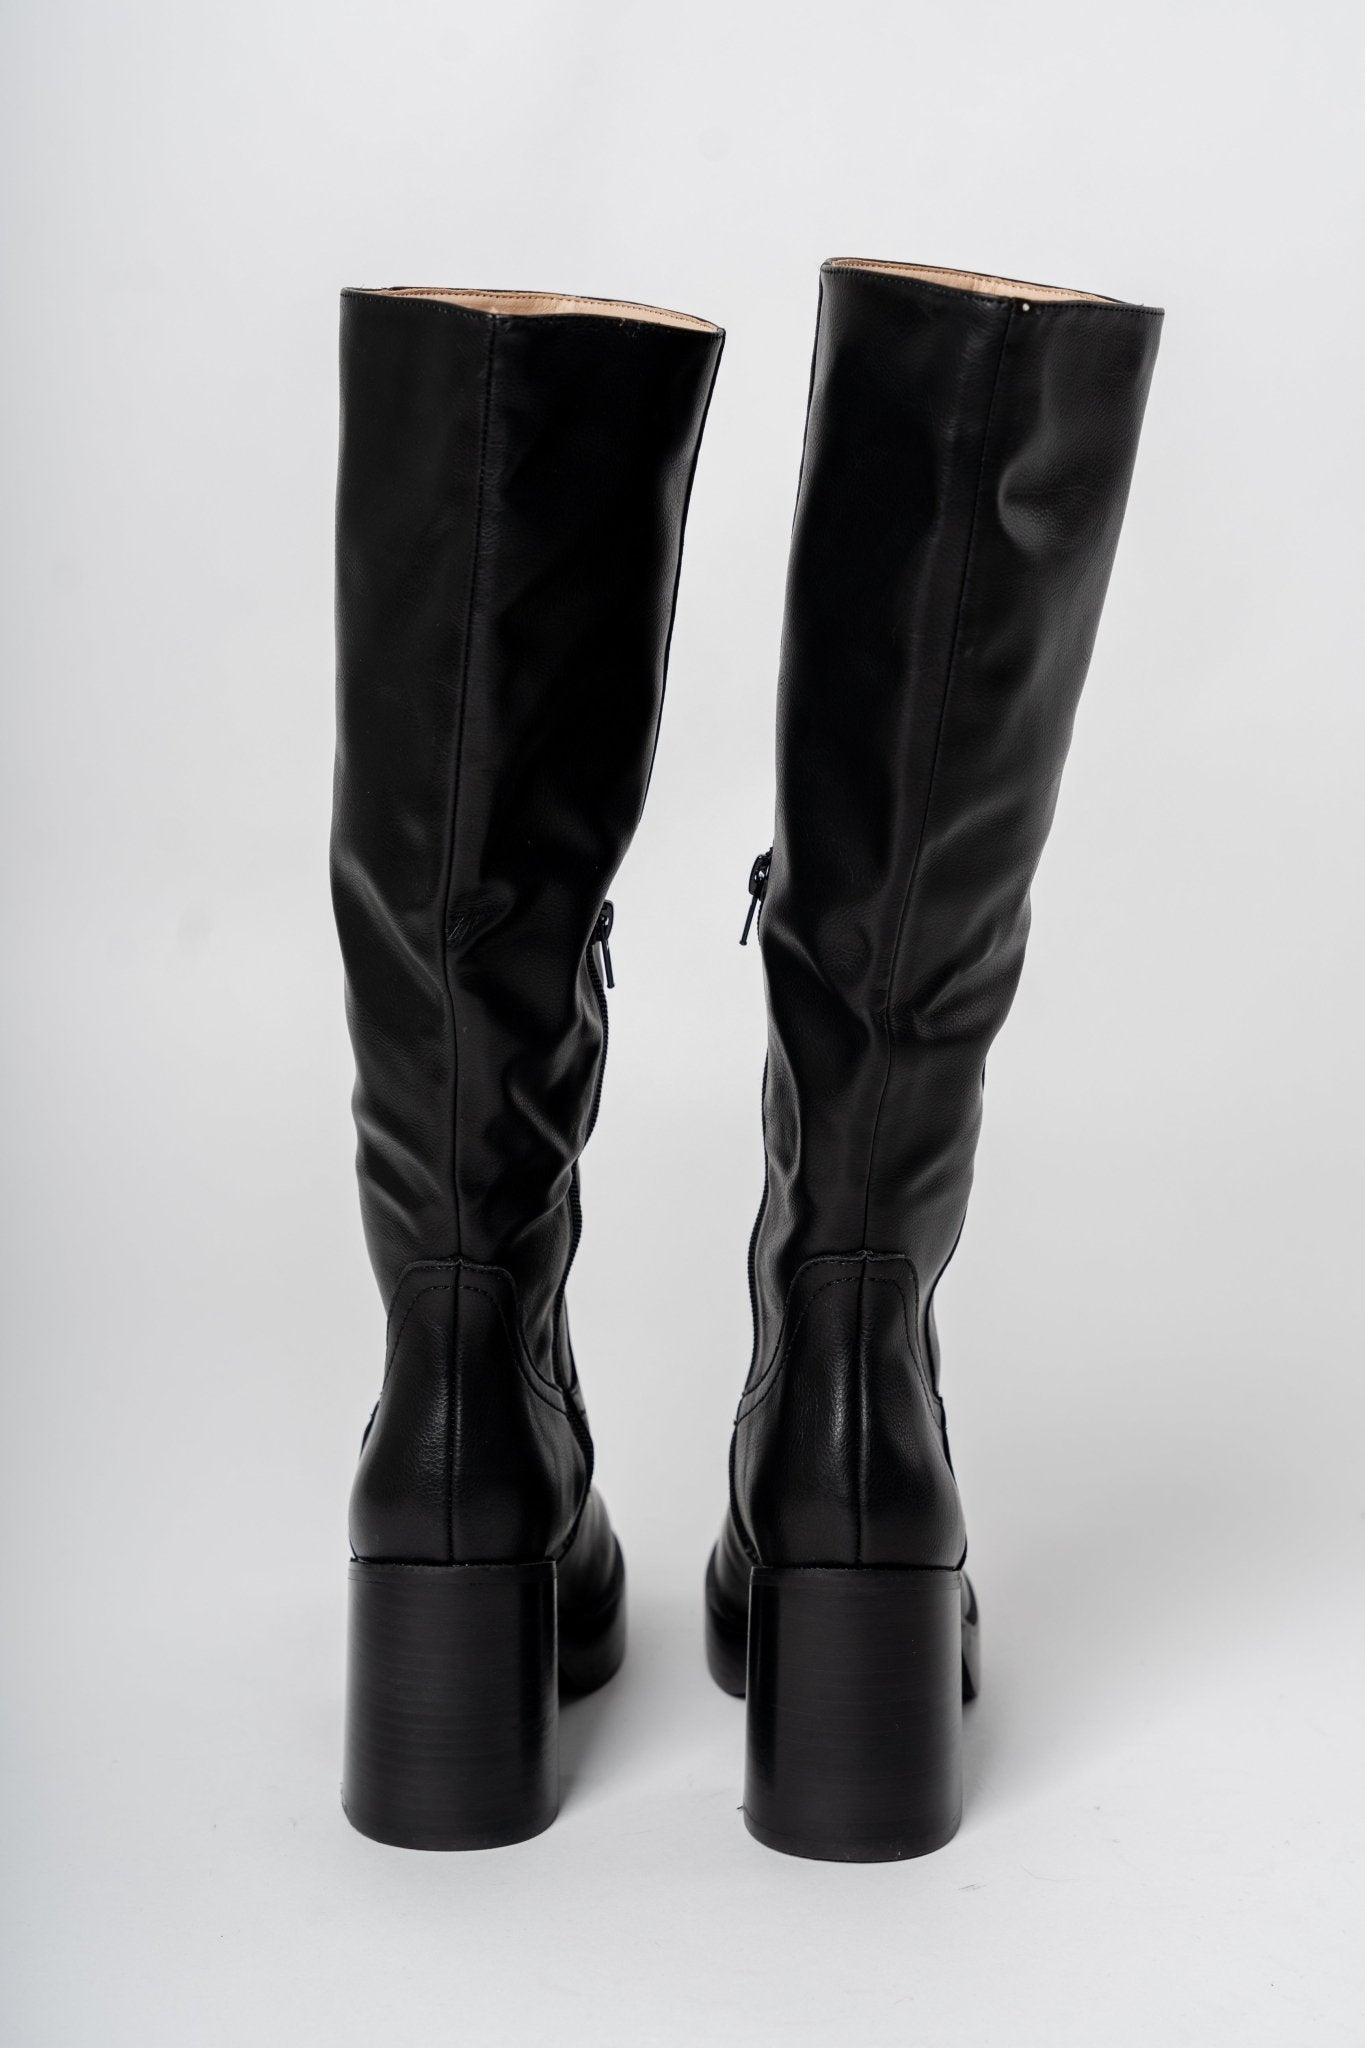 Juniper platform knee high boot black - Affordable shoes - Boutique Shoes at Lush Fashion Lounge Boutique in Oklahoma City